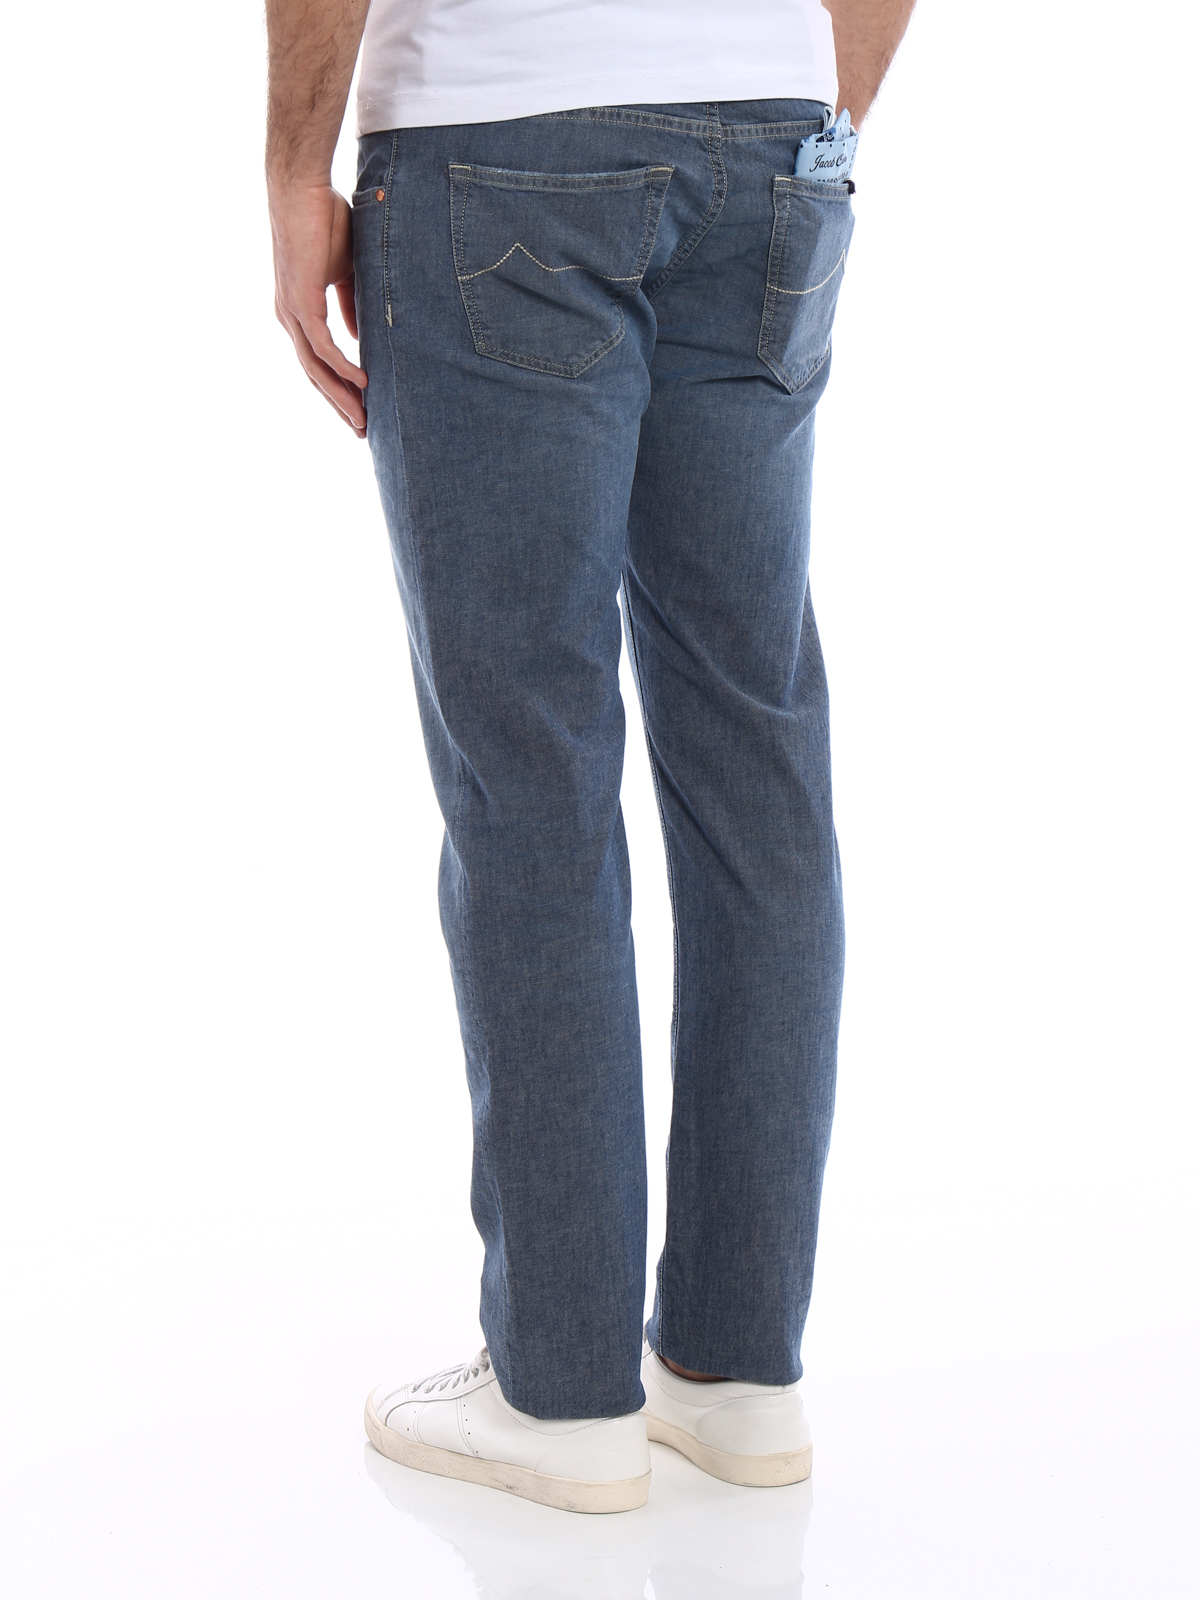 jacob cohen handmade tailored jeans